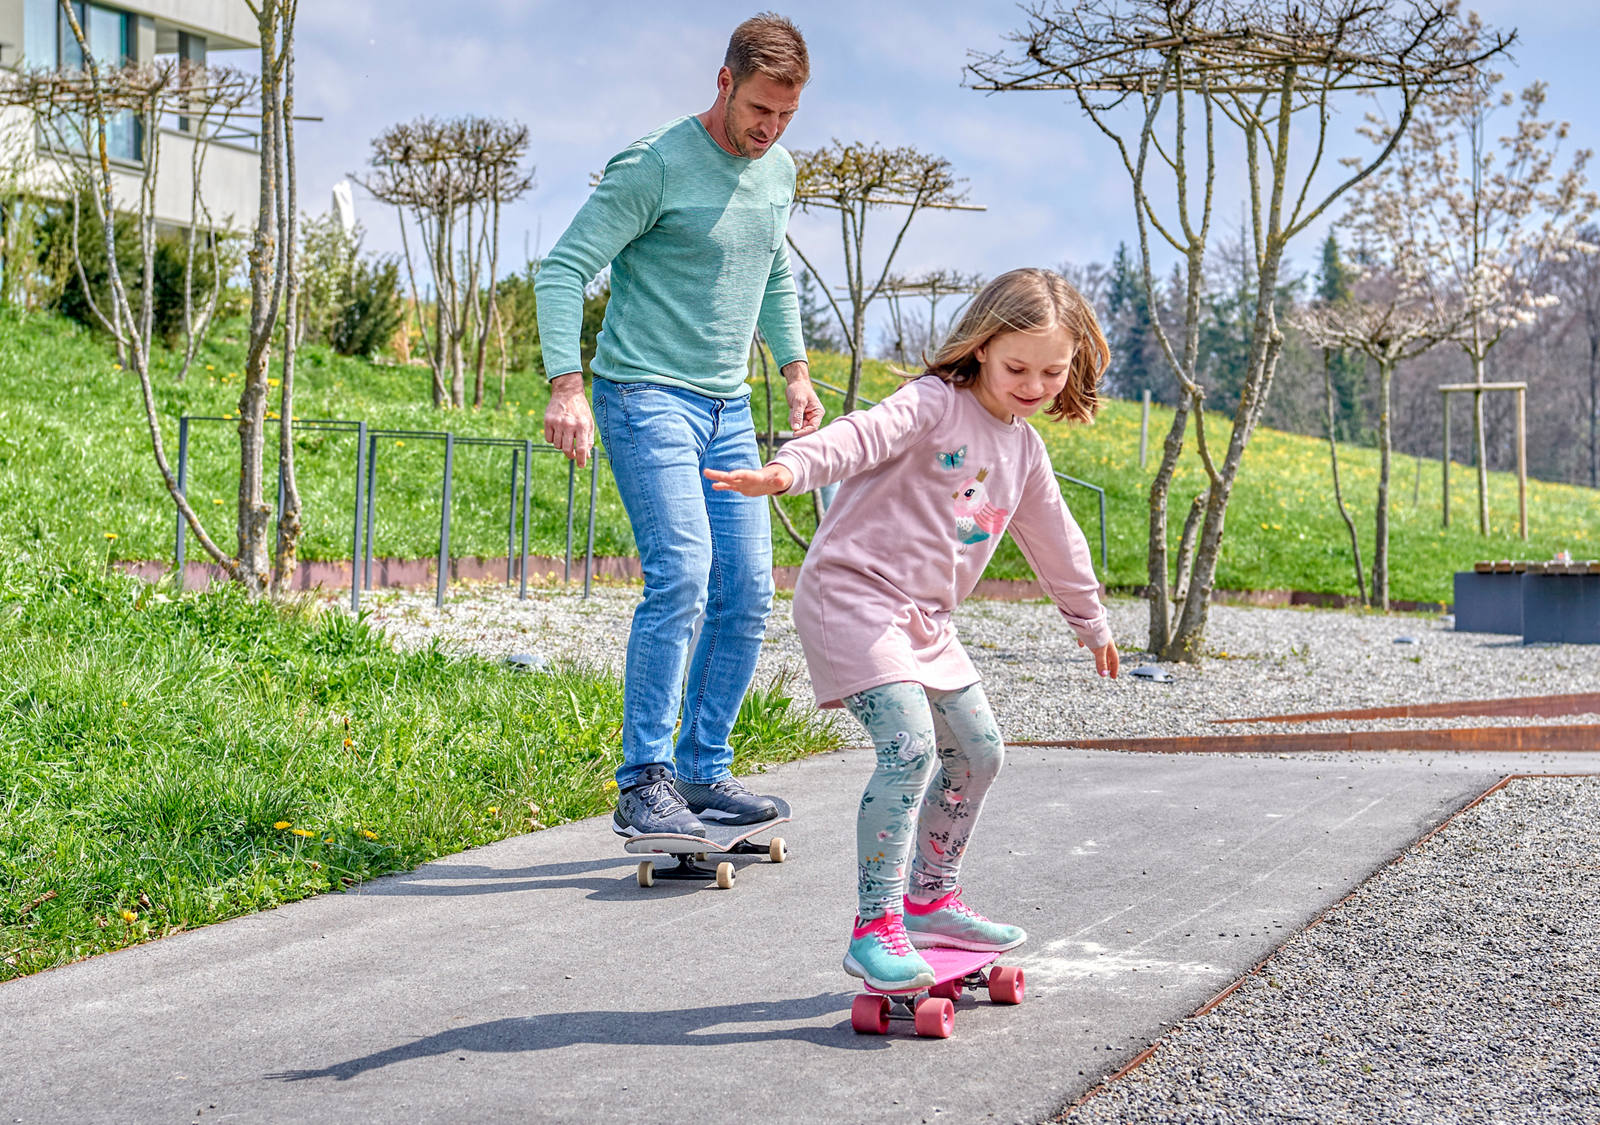 Father and daughter practicing skateboarding